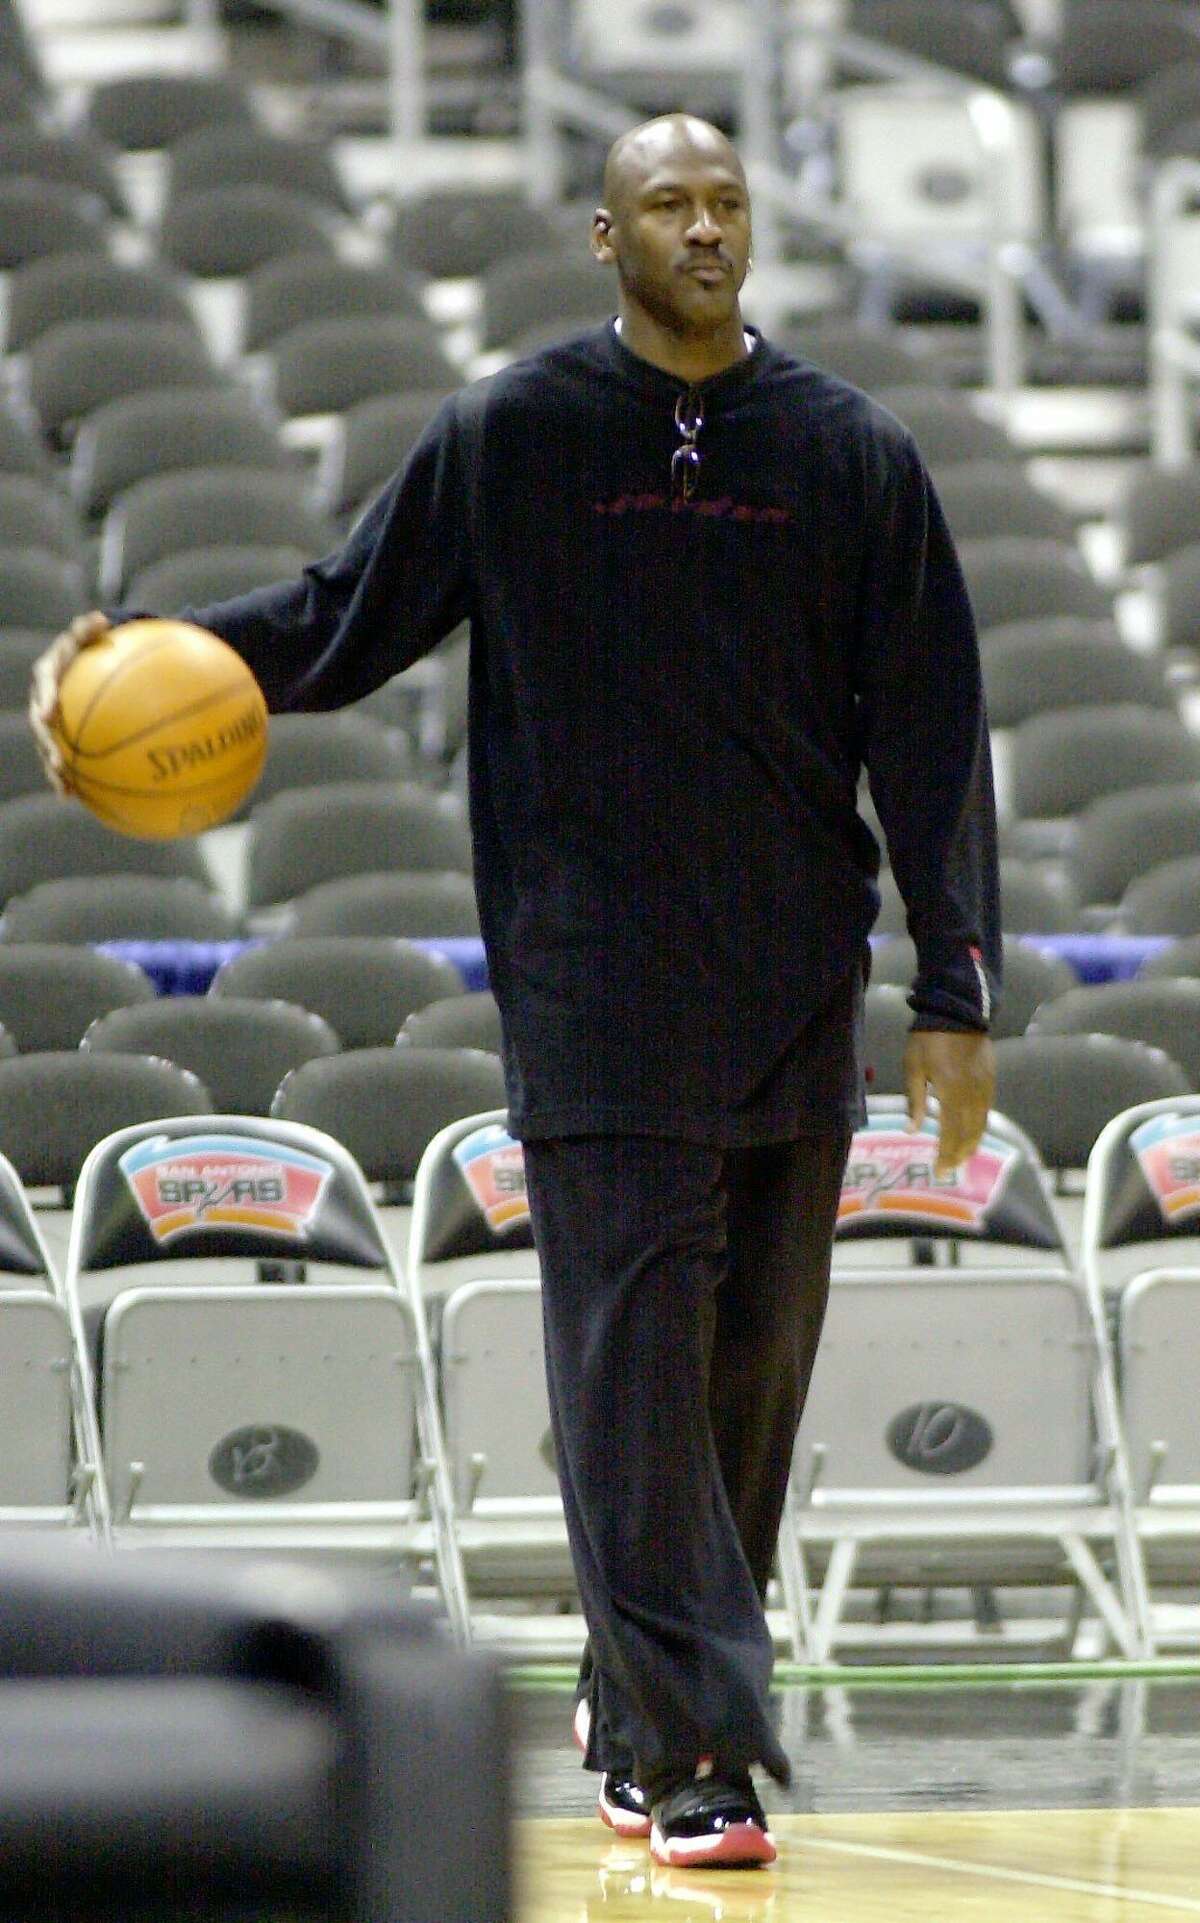 Injured star Michael Jordan wears street clothes to shootaround at the Alamodome in 2001.